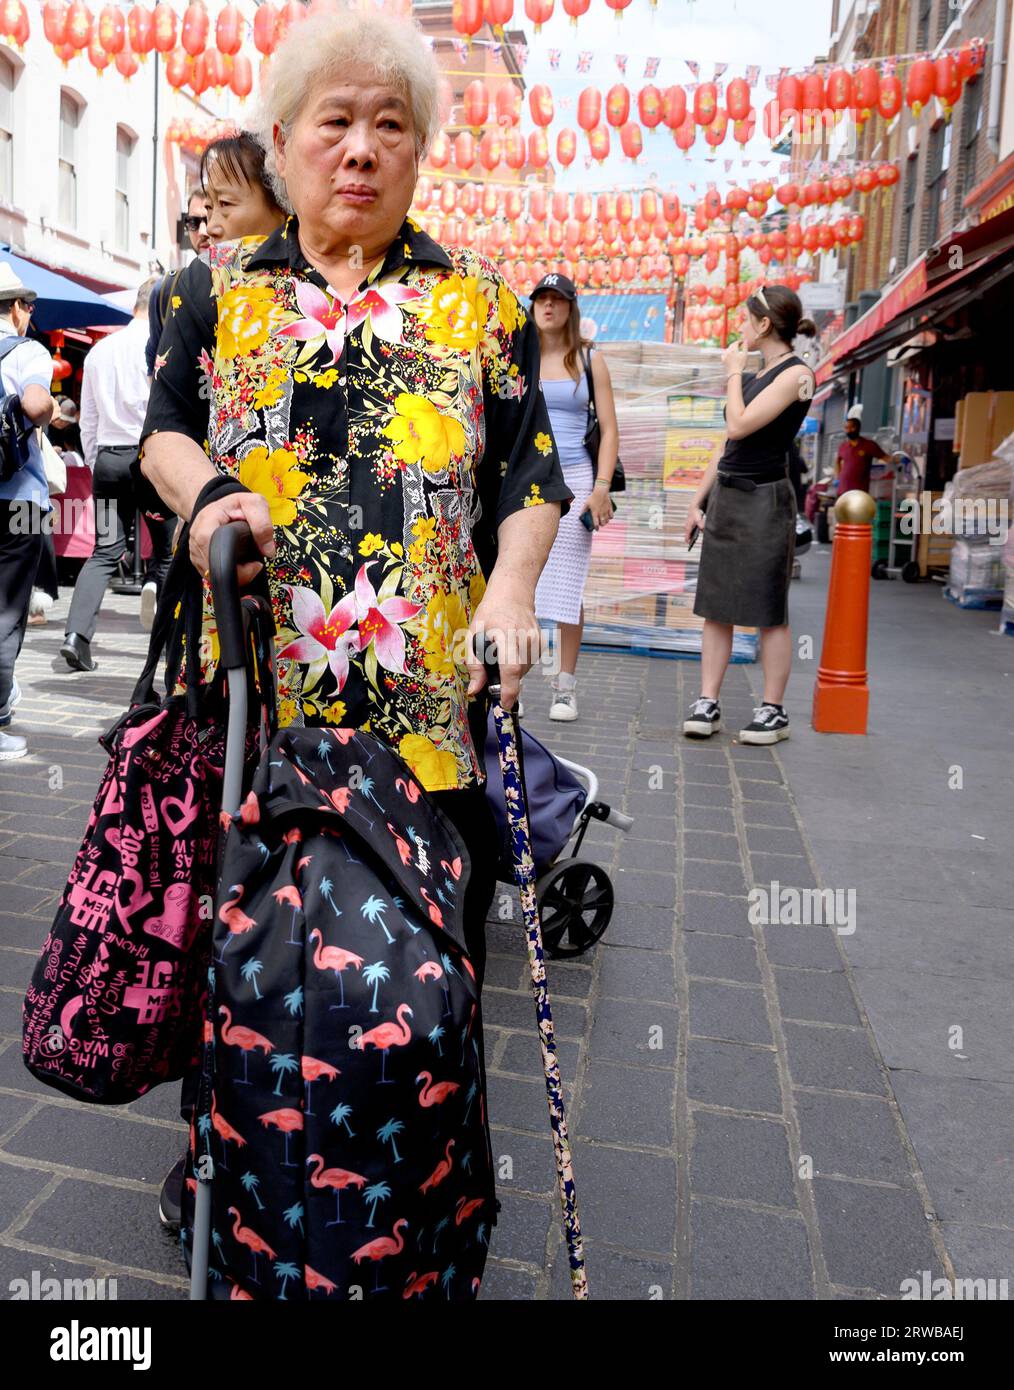 London, England, UK. Elderly Chinese woman in Chinatown wearing a bright flowery top Stock Photo